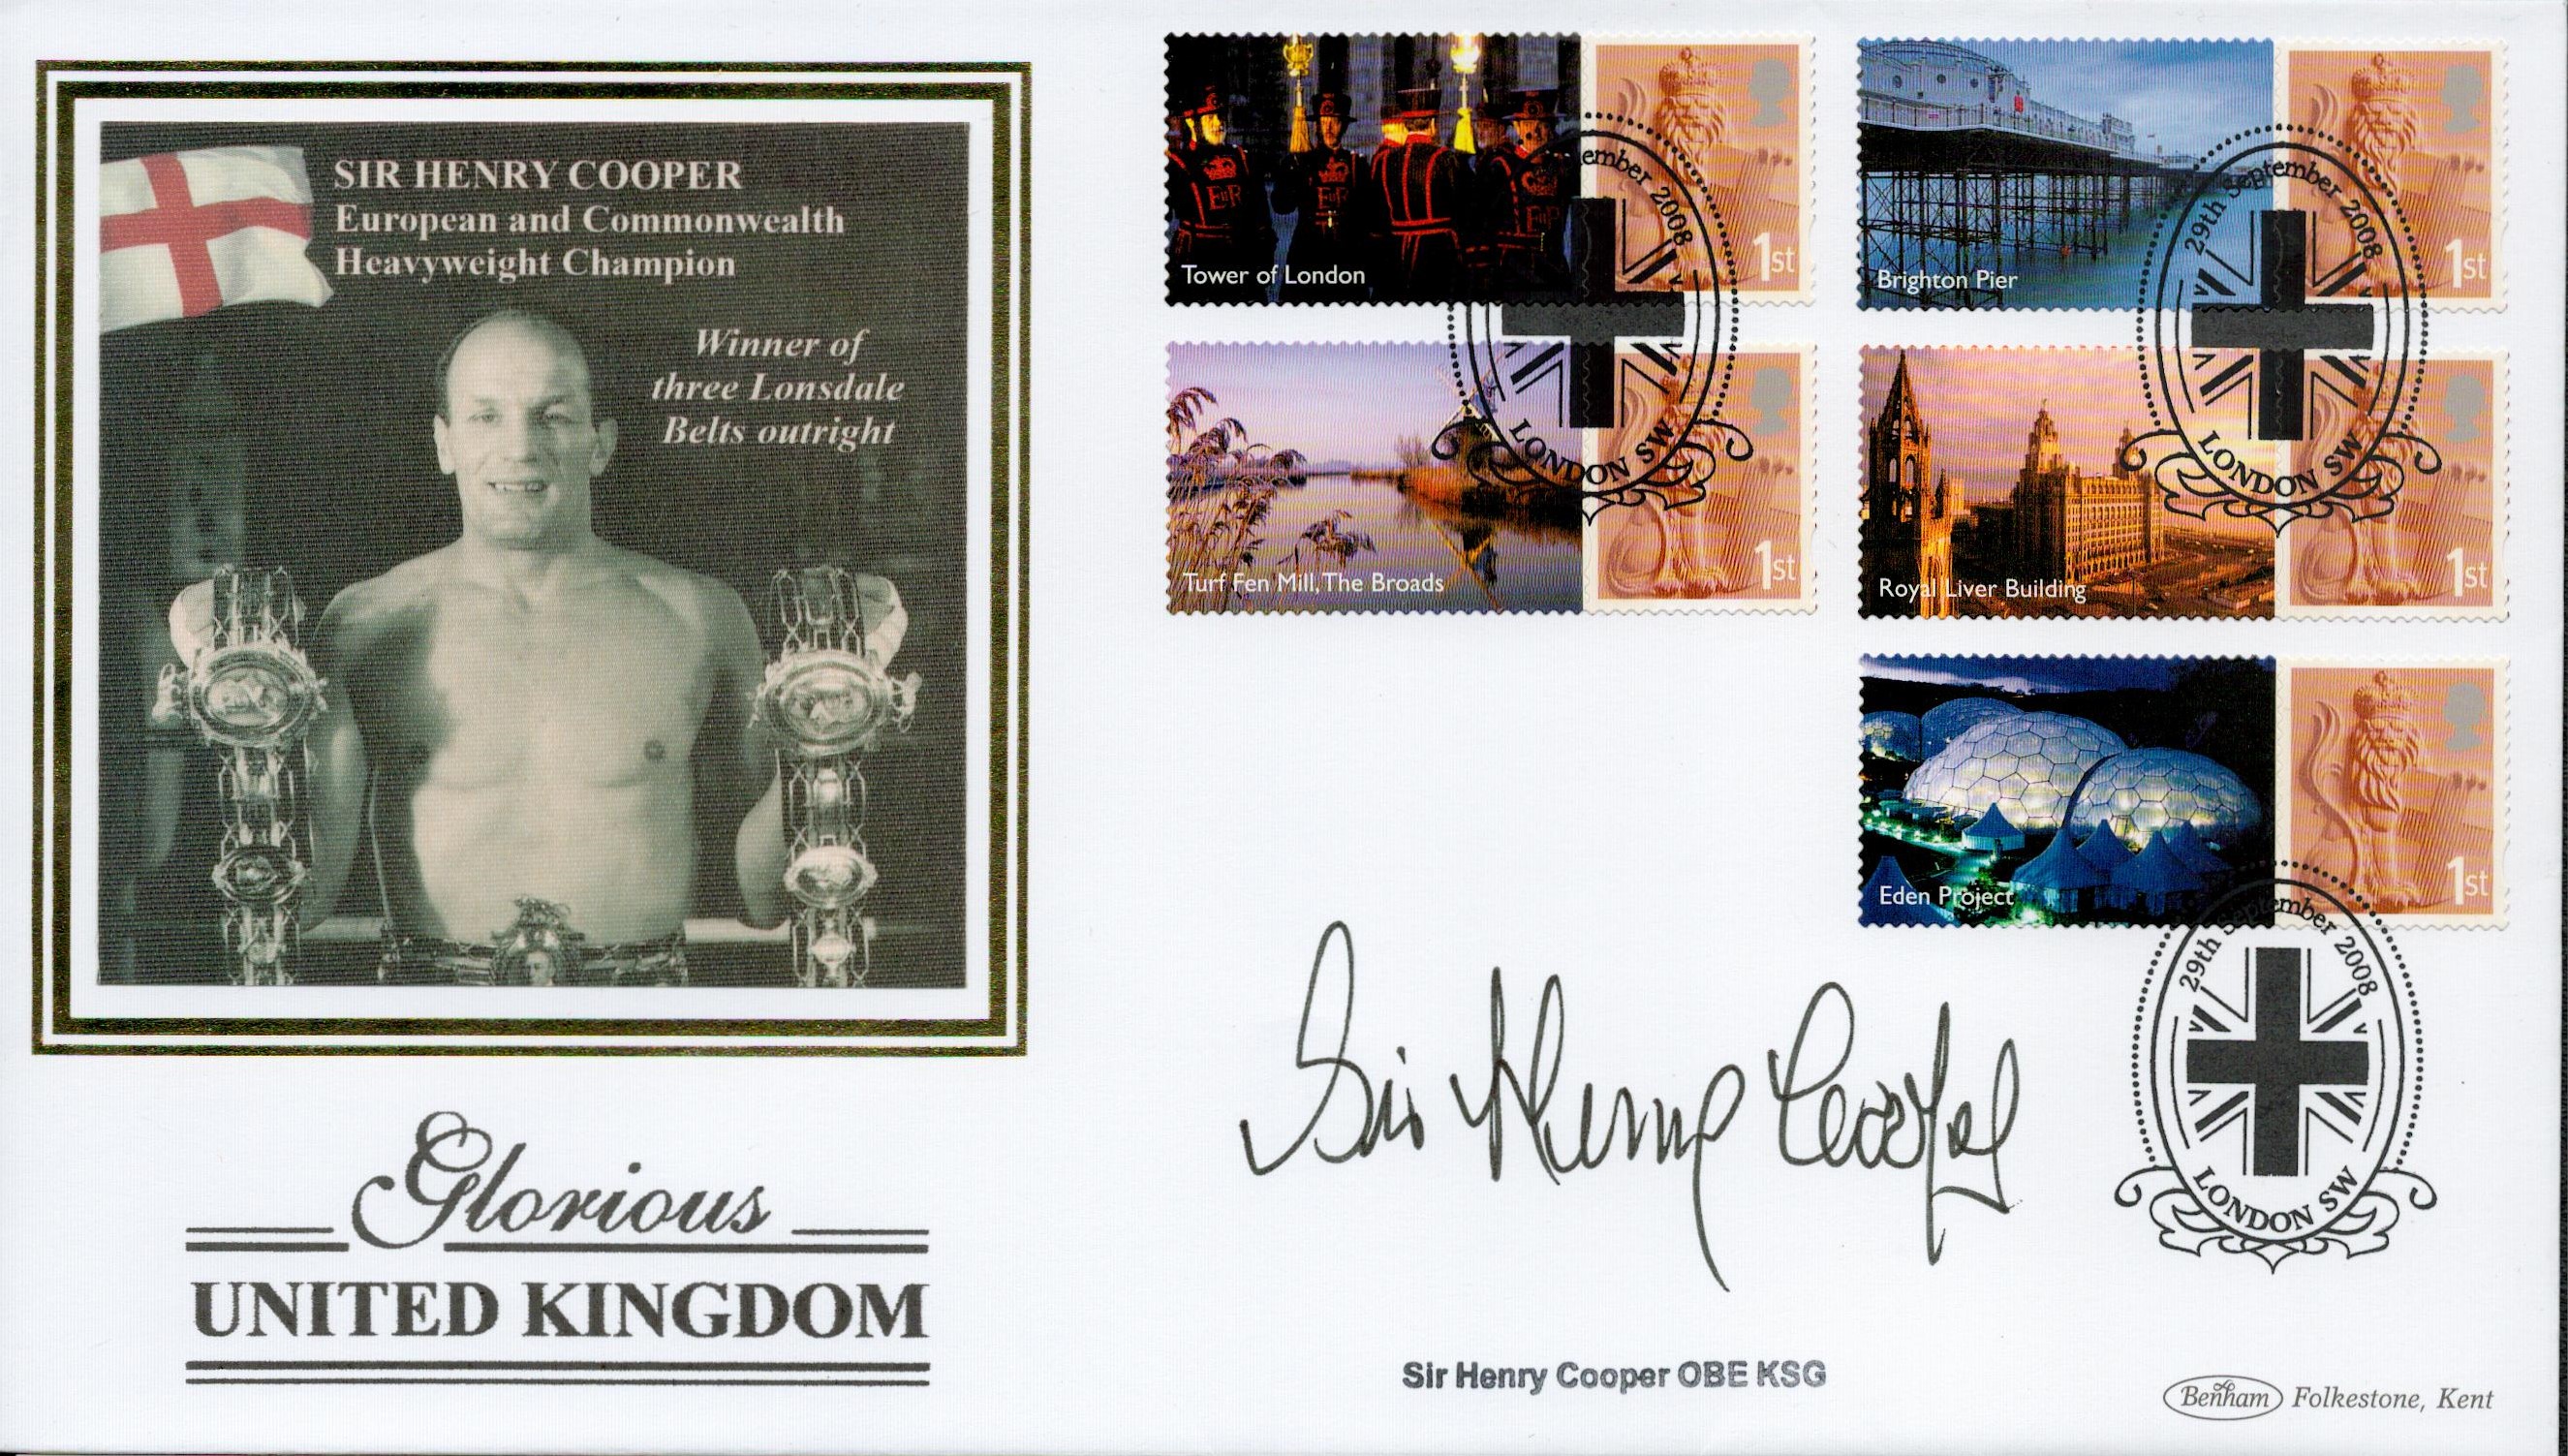 Sir Henry Cooper signed Glorious United Kingdom FDC. 29/9/08 London postmark. Good condition. All